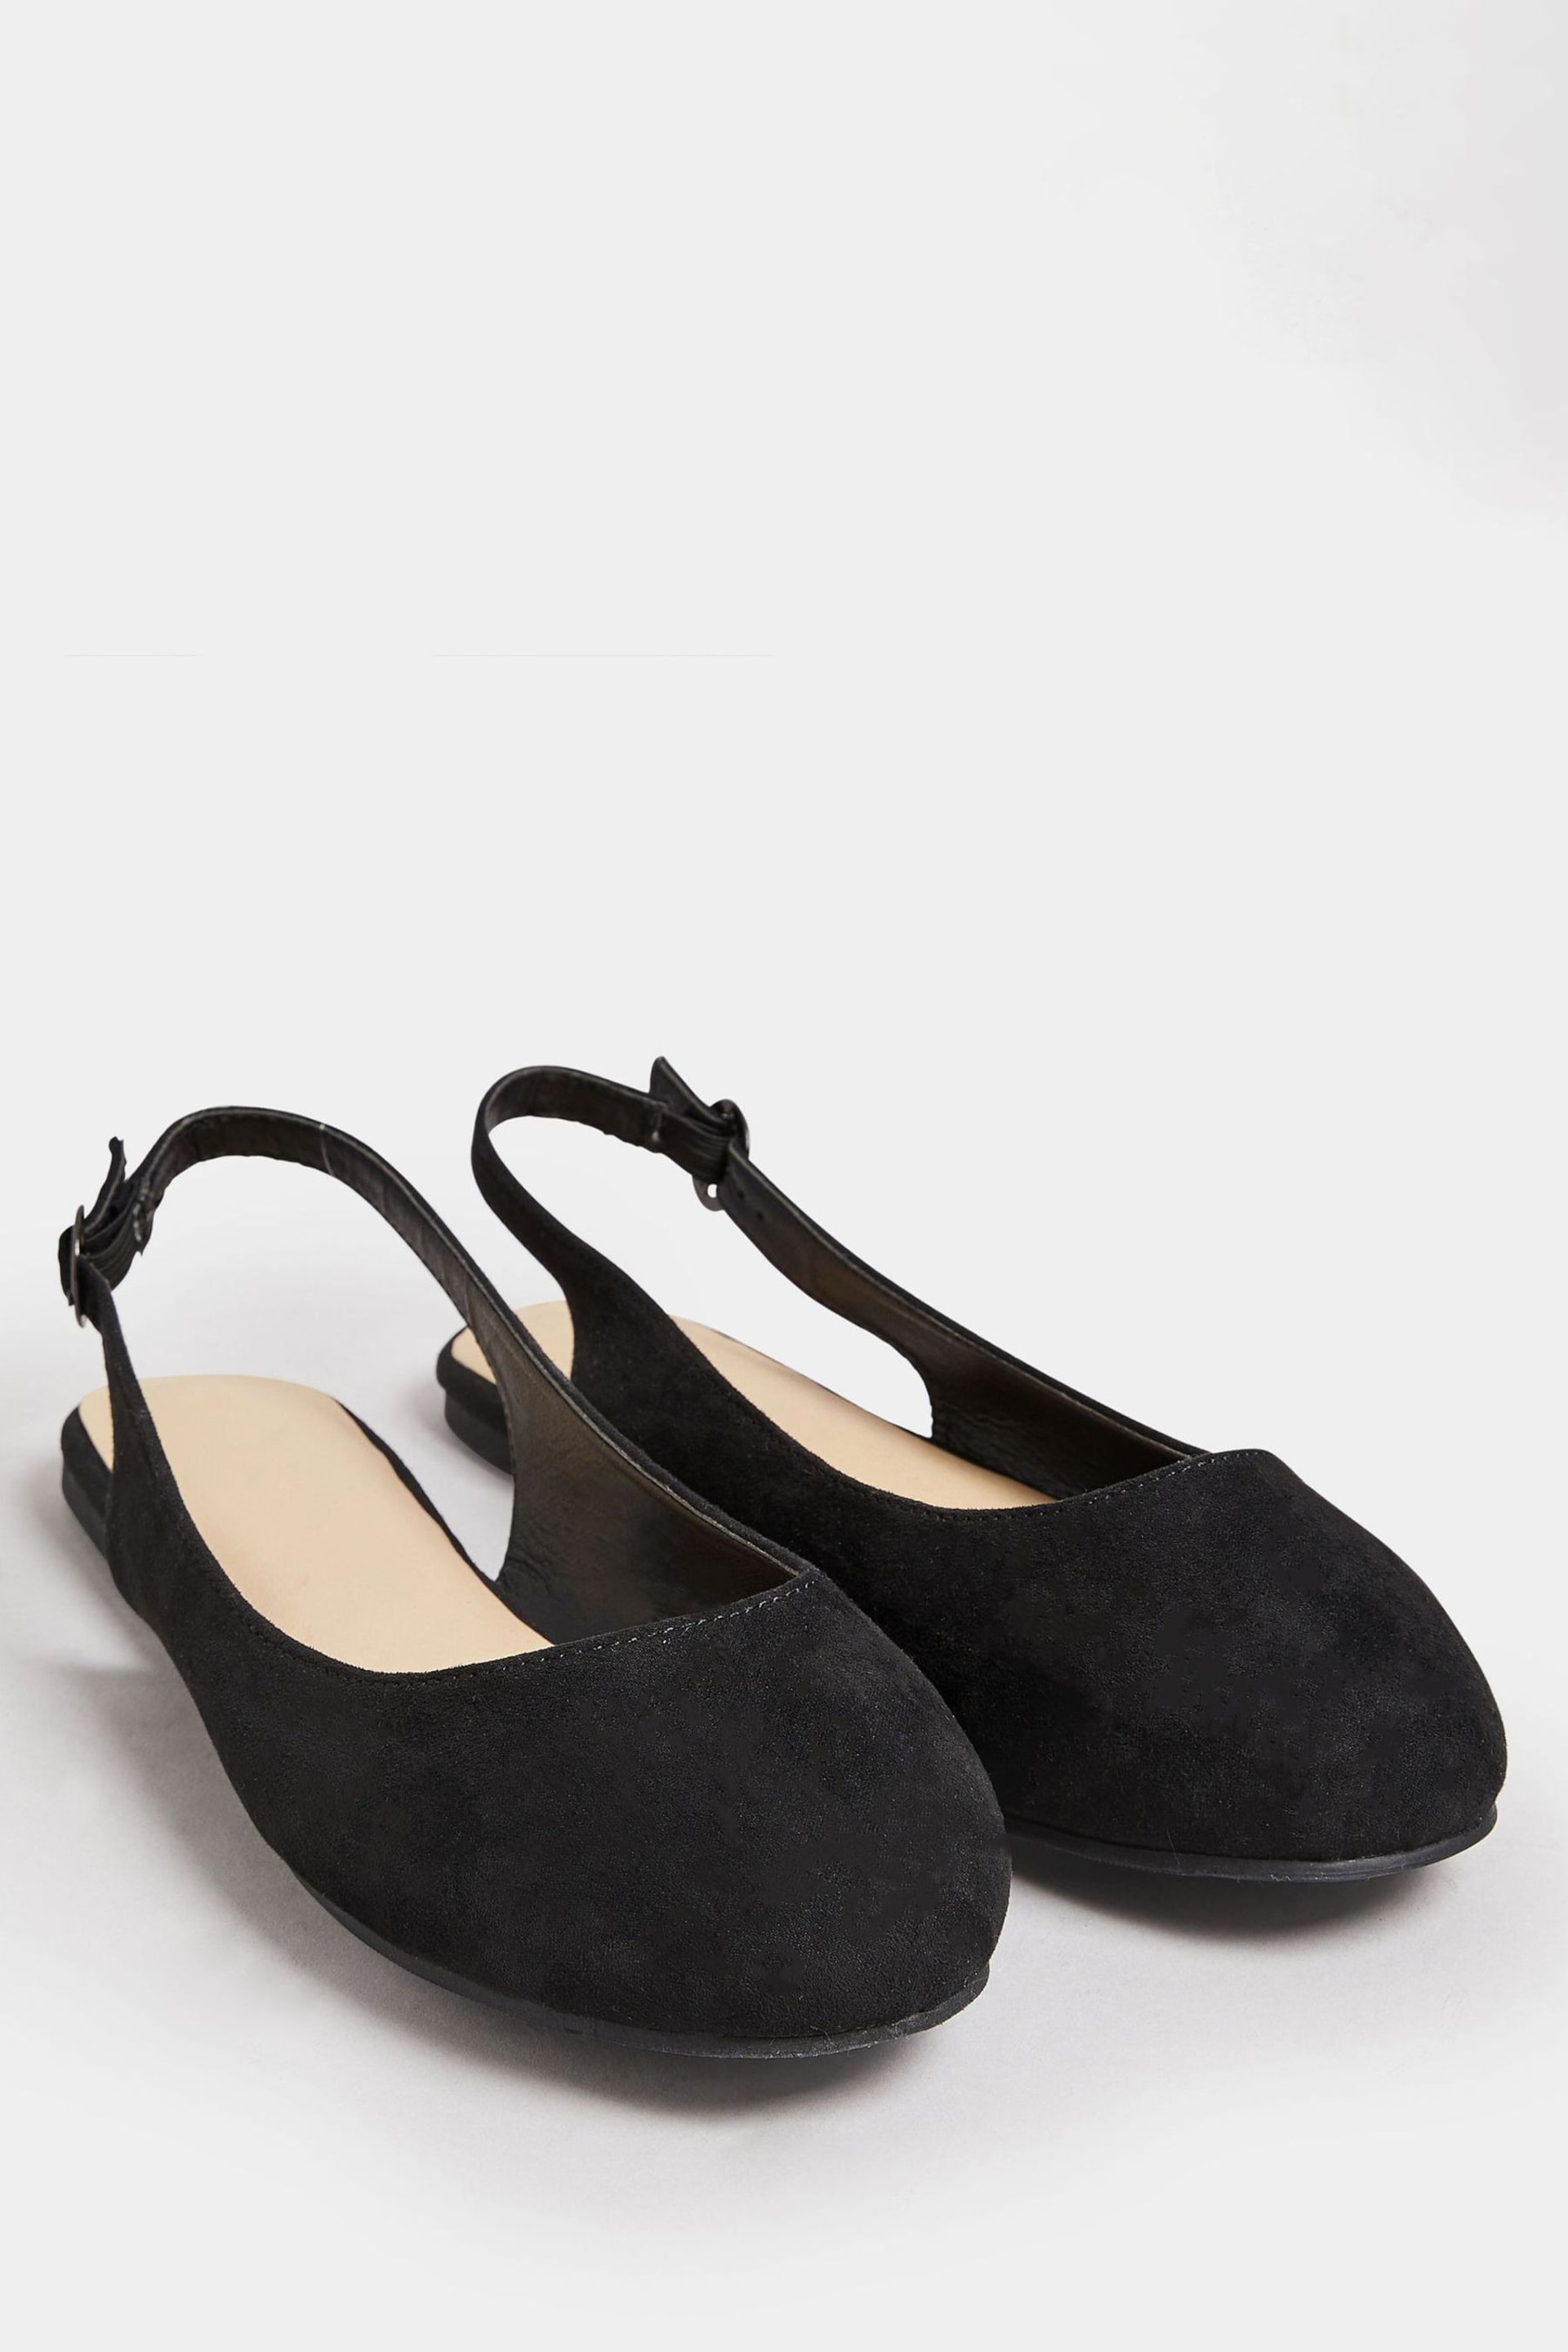 Yours Curve Black Faux Suede Slingback Pumps In Extra Wide EEE Fit - Image 2 of 5